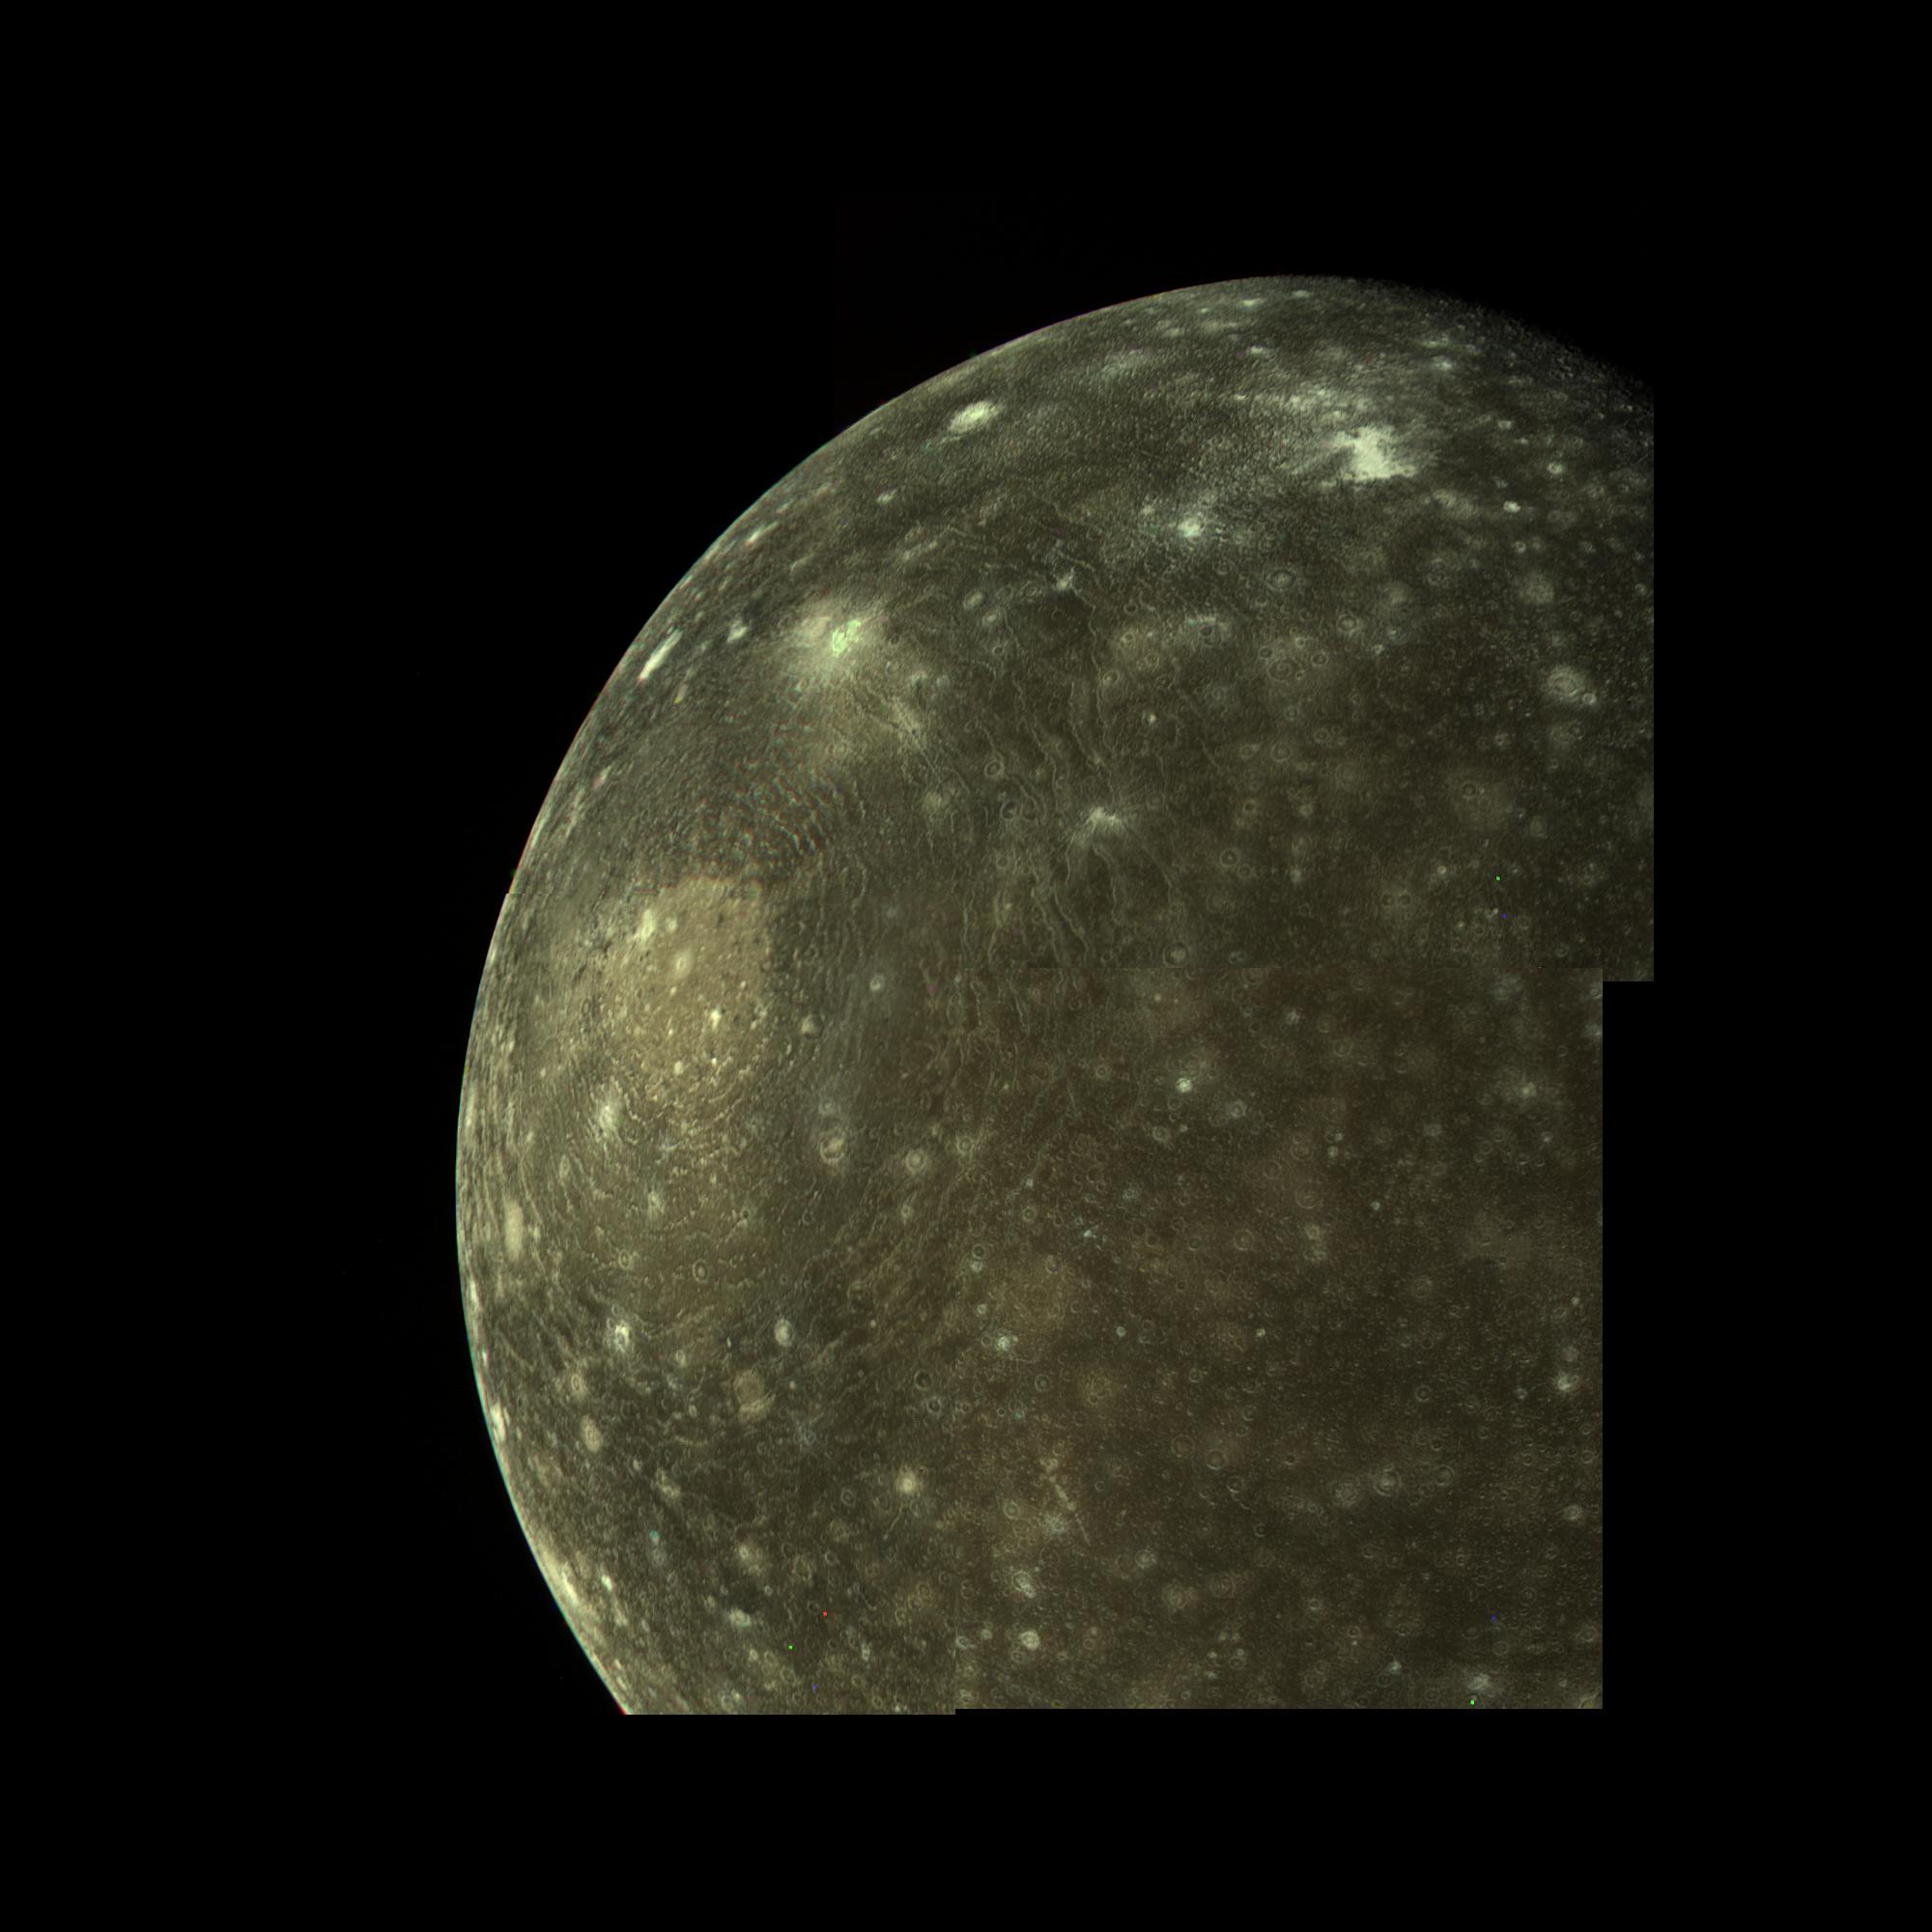 Callisto was revealed by NASA's Voyager cameras to be a heavily cratered and hence geologically inactive world. 